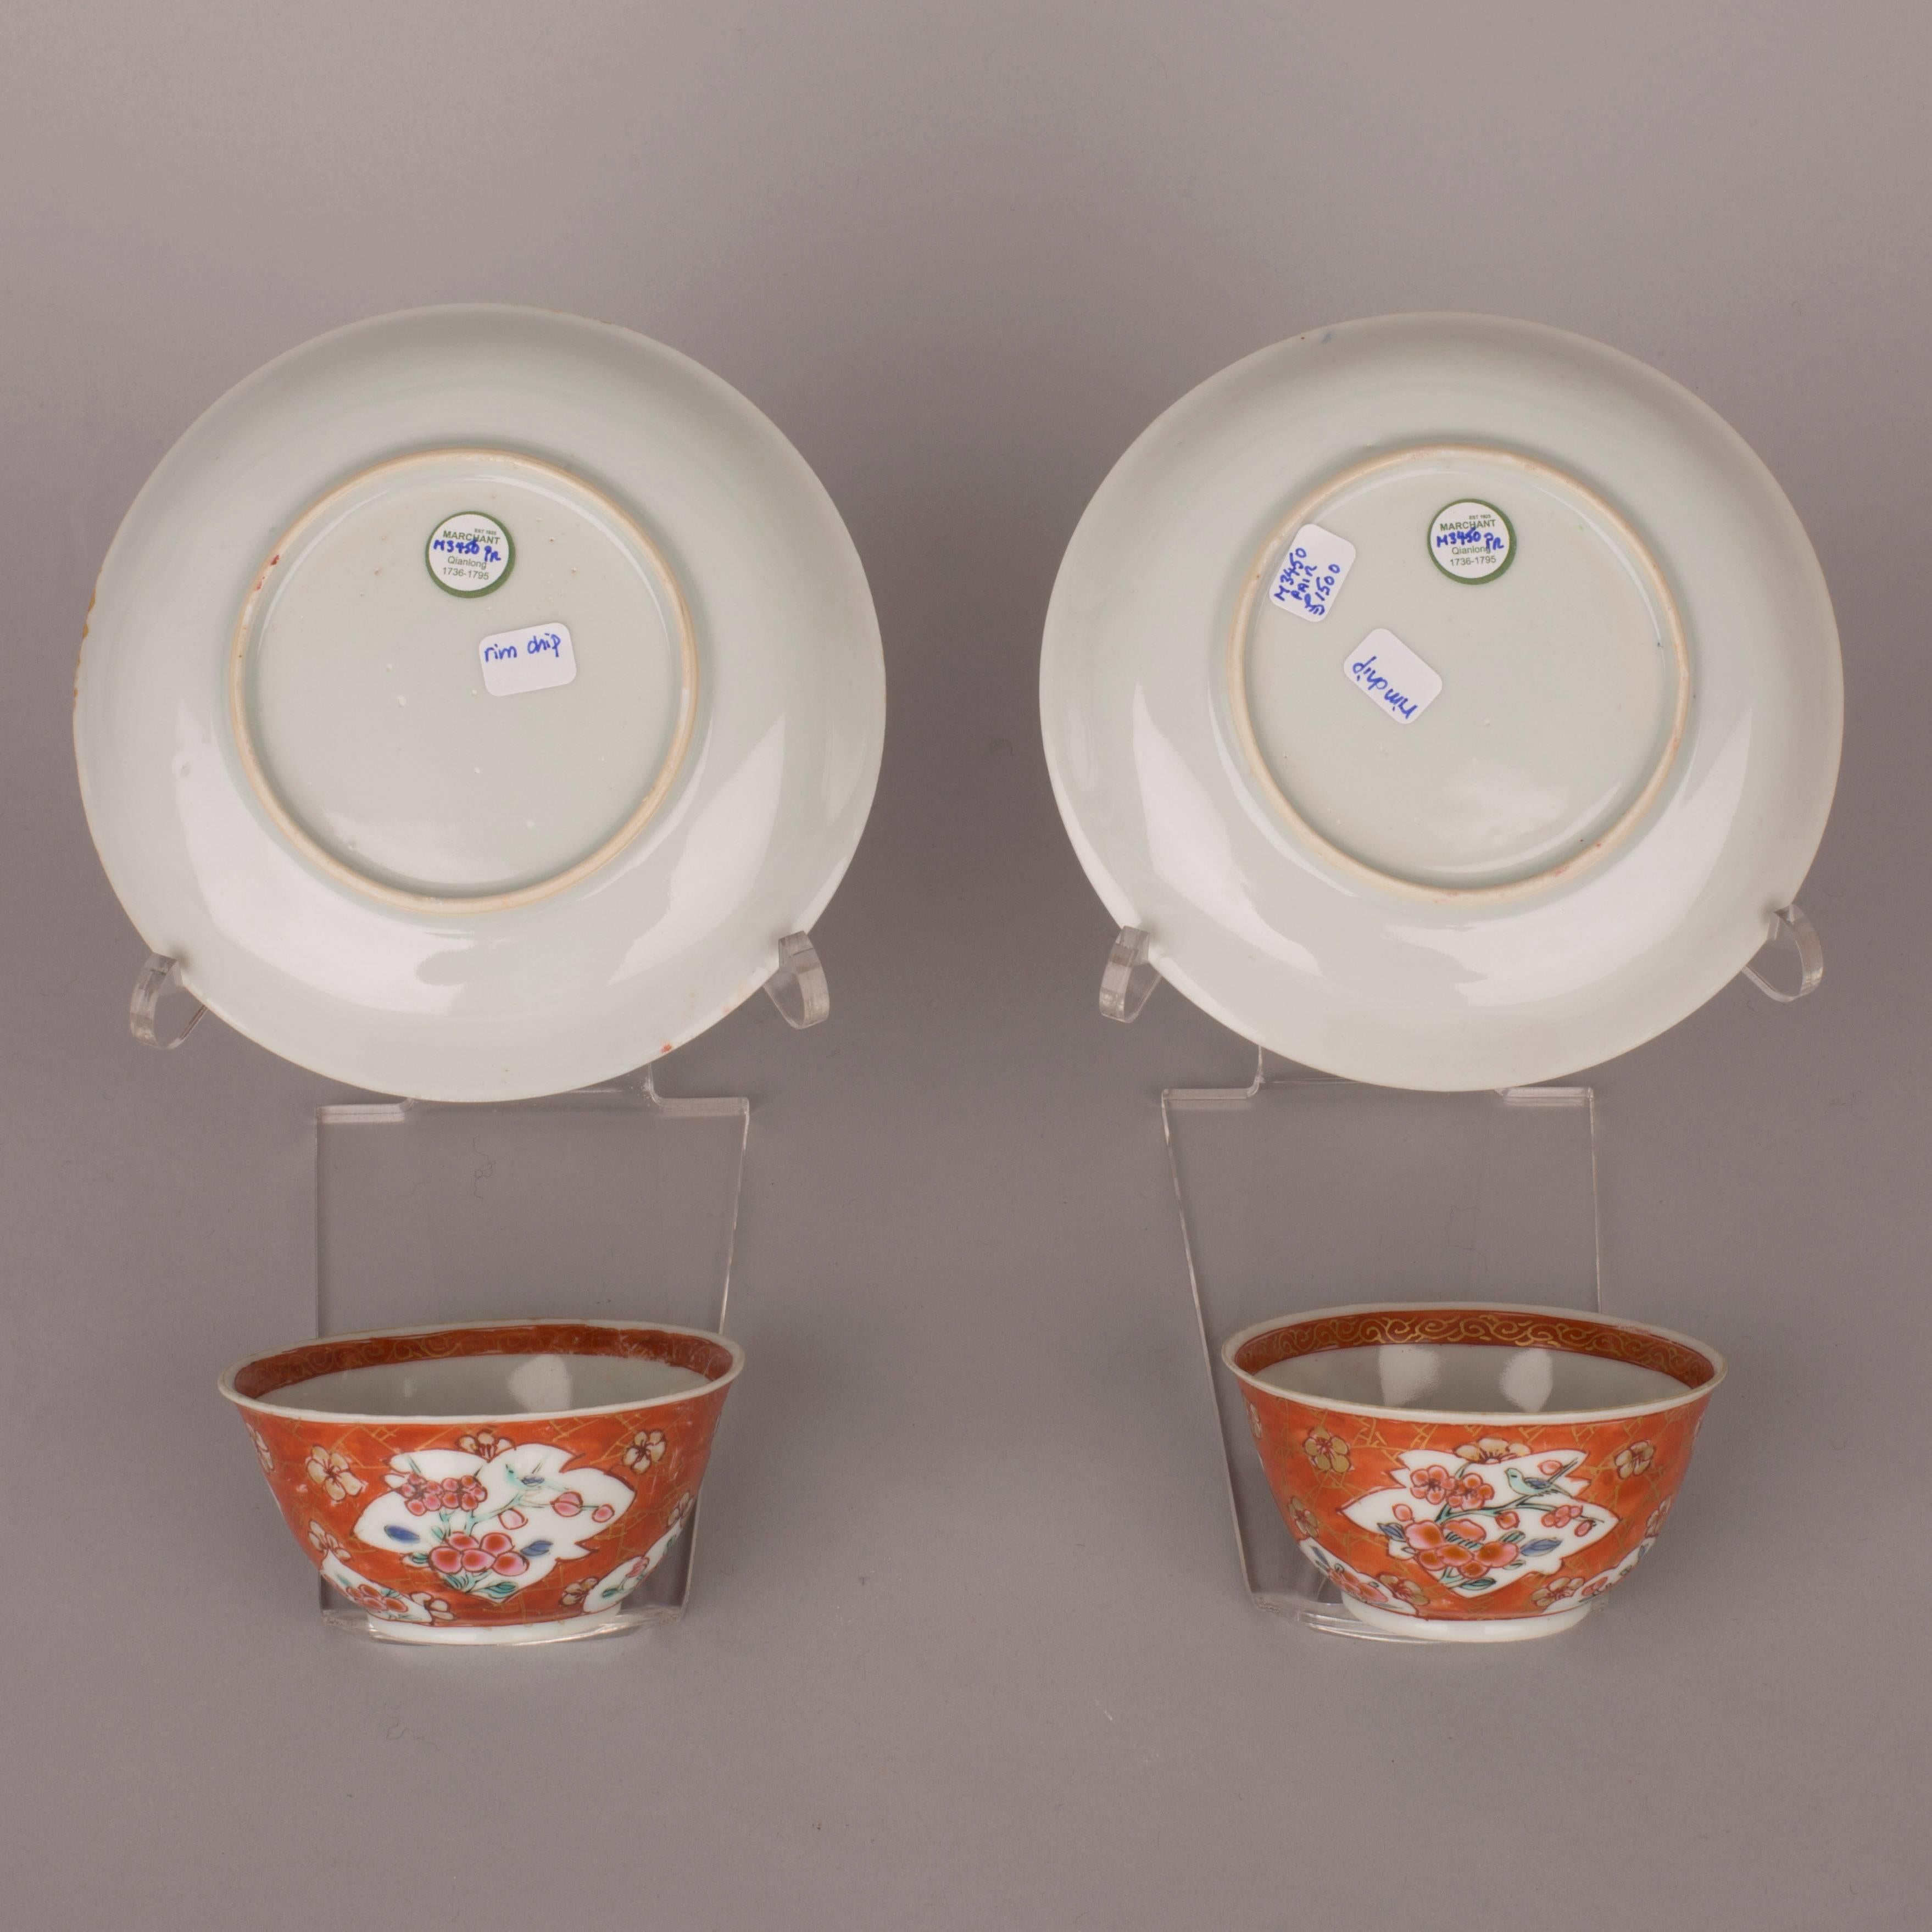 Qing Pair of Chinese Porcelain Famille Rose Cups and Saucers, 18th Century